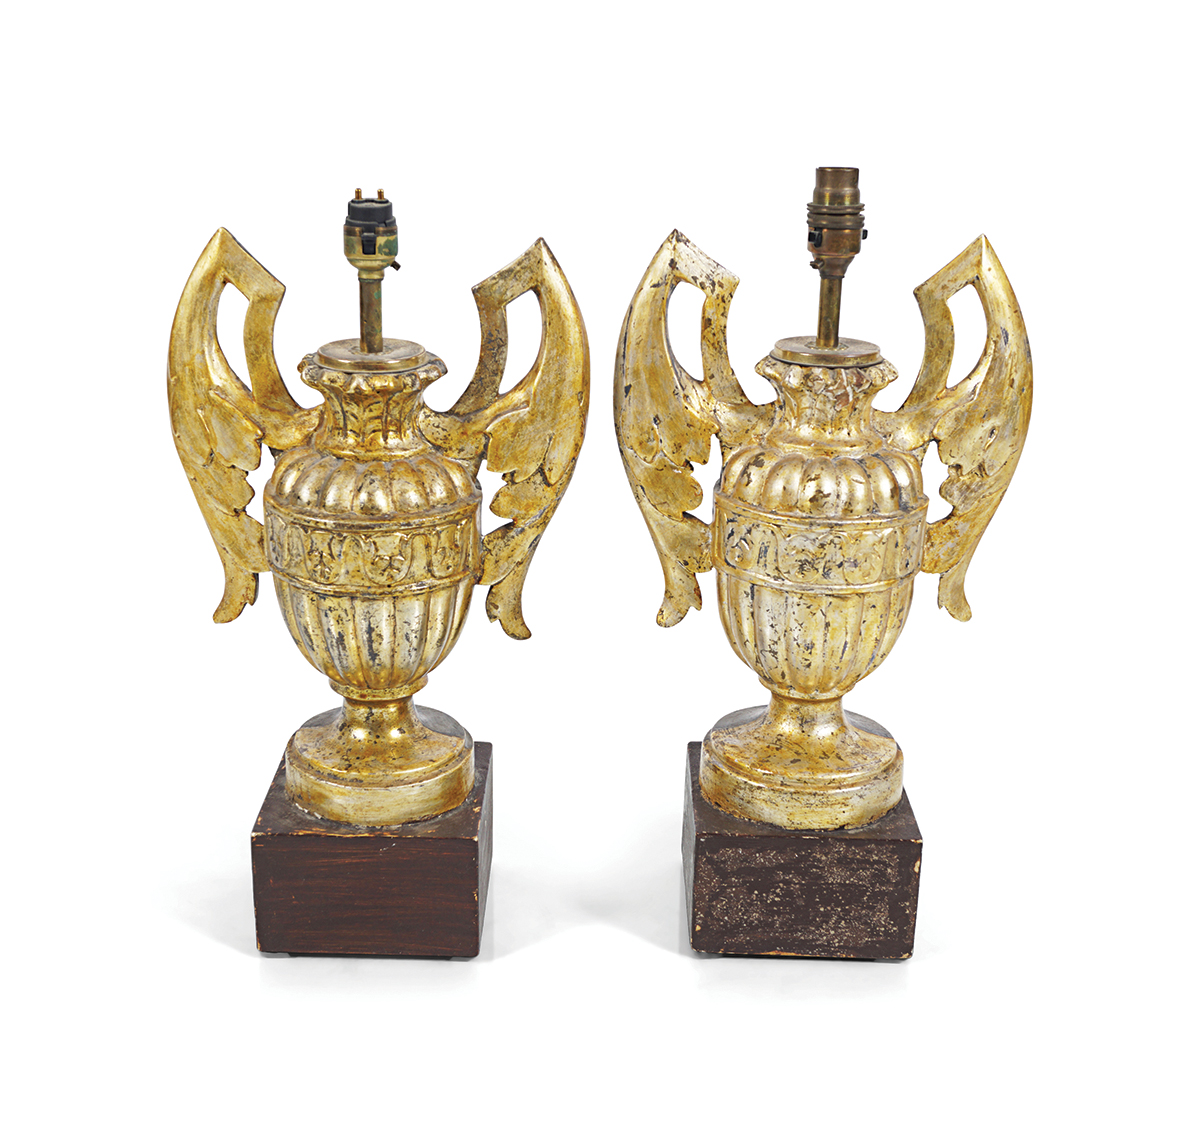 PAIR OF CARVED GILT WOOD VASE STEMMED TABLE LAMPS - Image 2 of 6